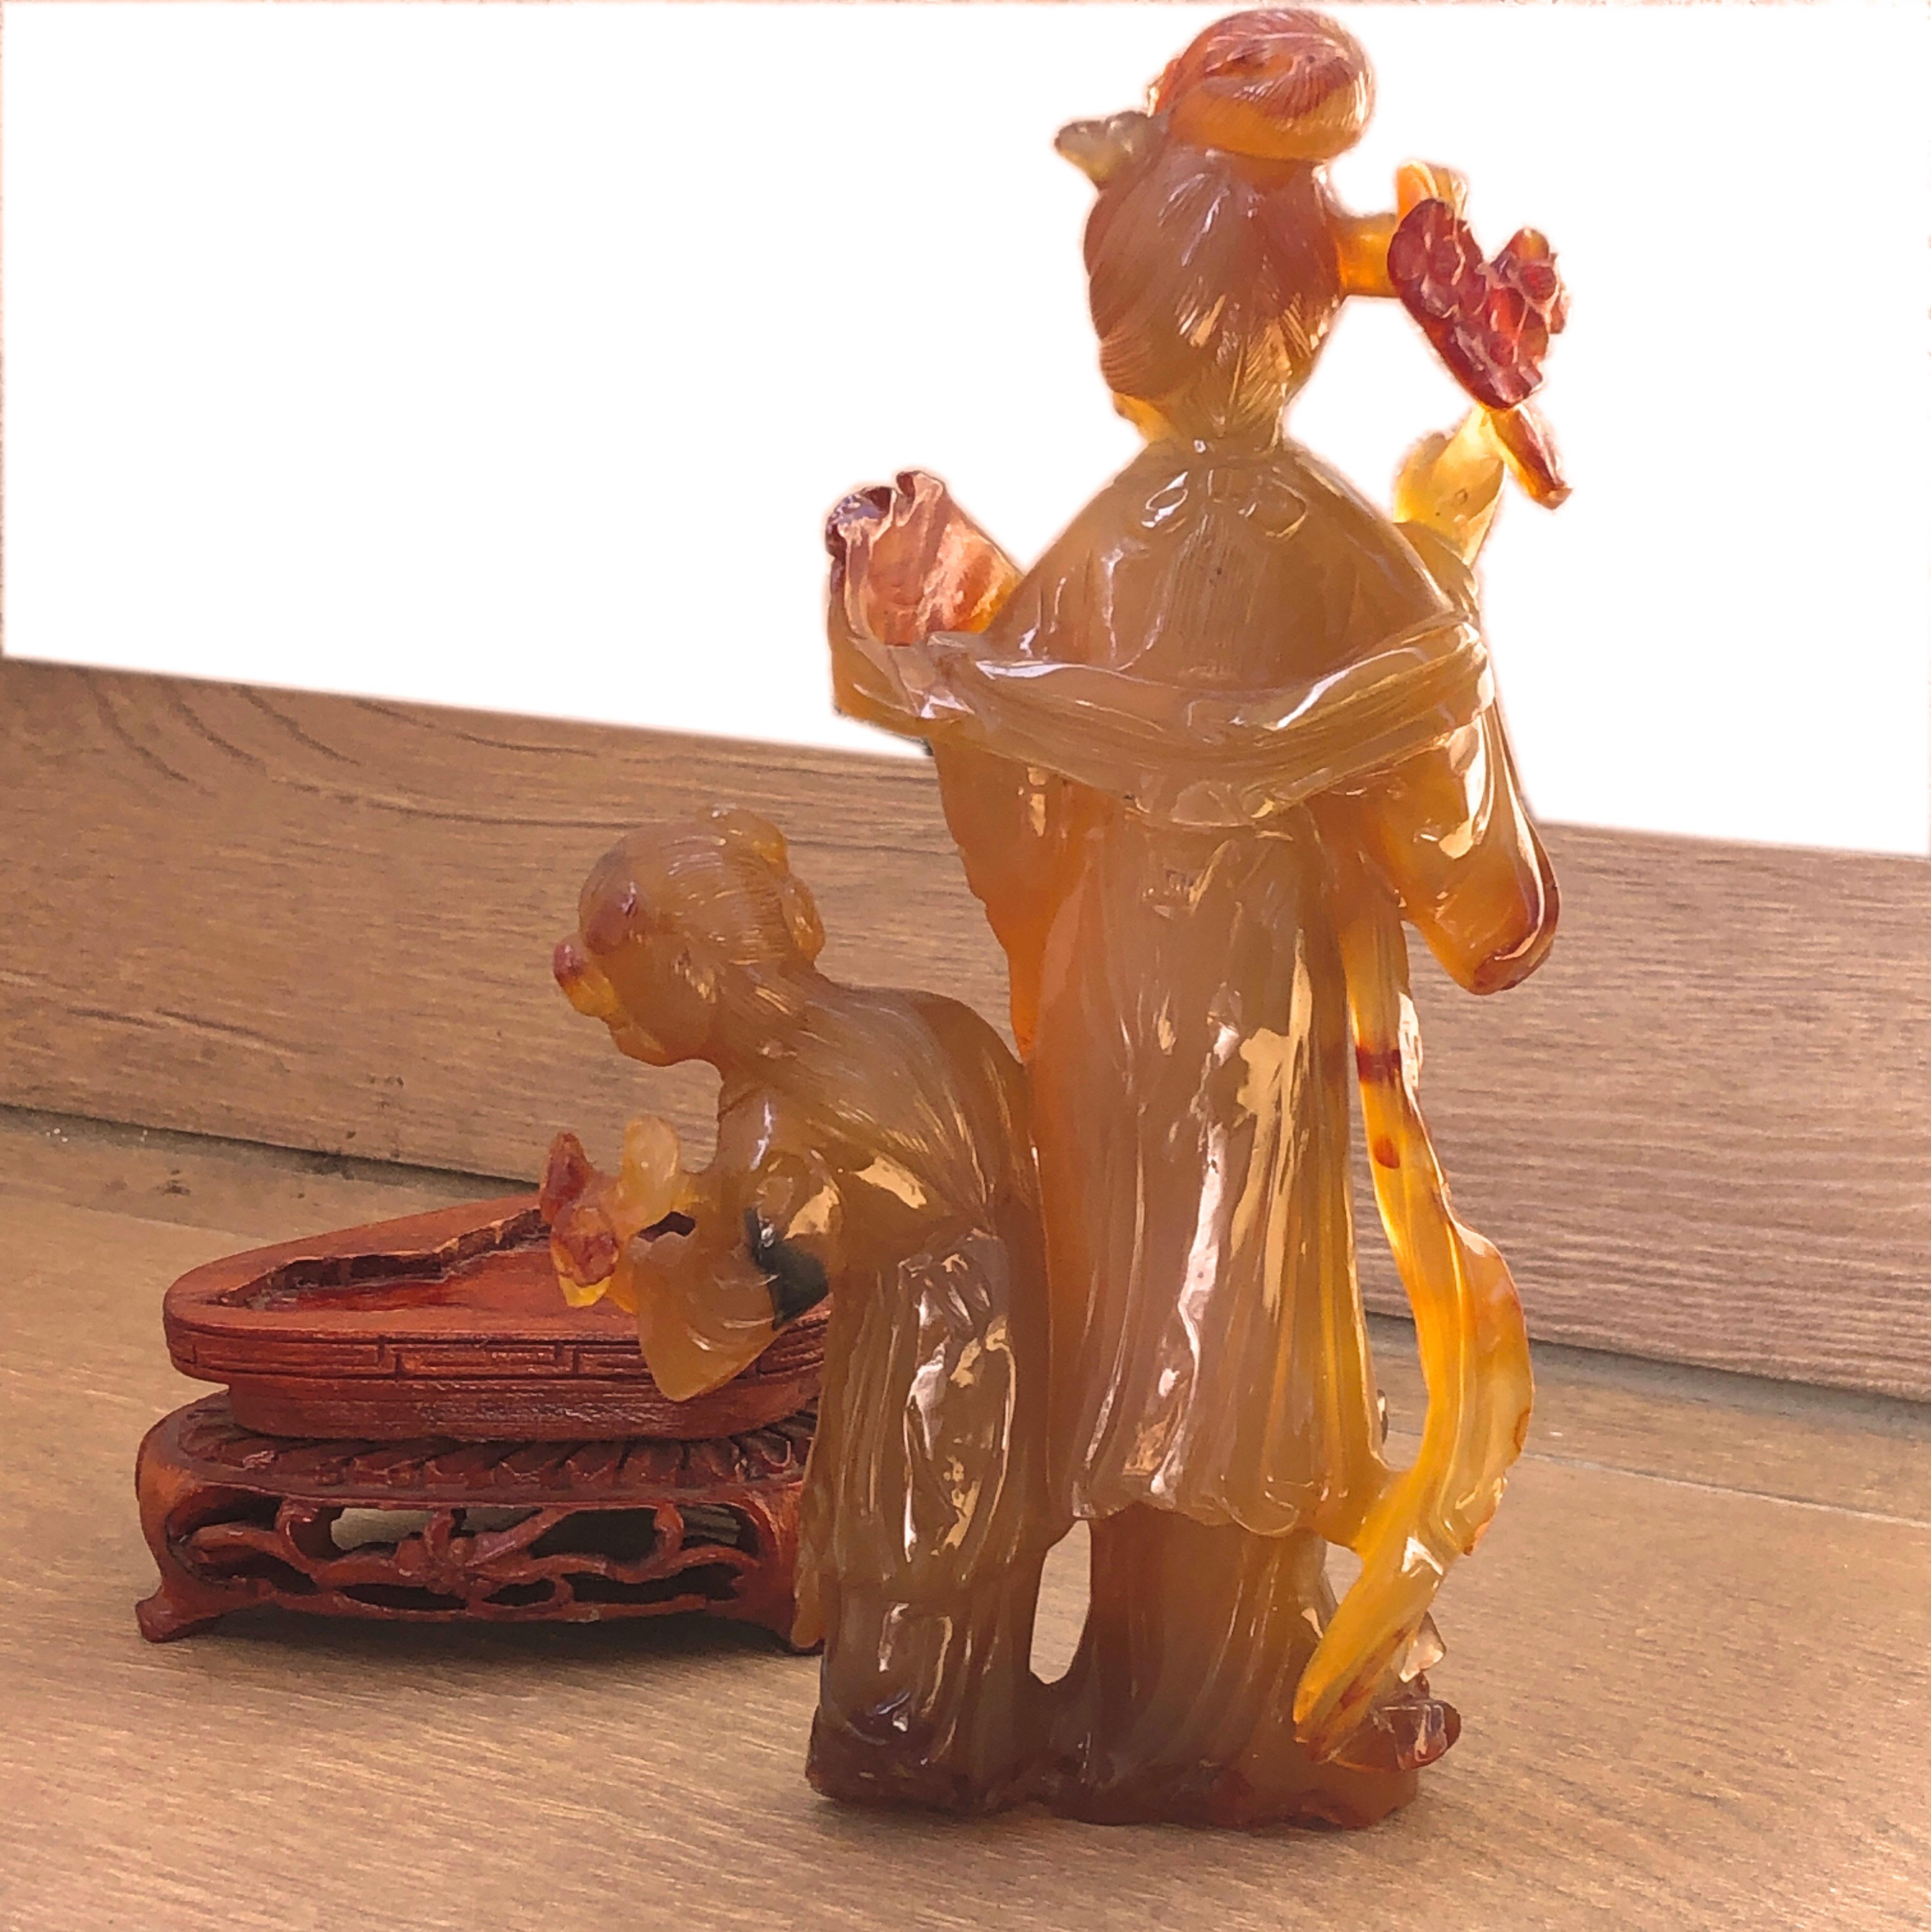 One-of-a-kind, Original 1930, Chinese Export Natural Red Carnelian Dame and Baby-Girl Figurines. Red Carnelian is of Indian Origin and Hand Carving and Engraving Work is Beautiffully Crisp and Detailed. Since ancient times the warm reddish carnelian